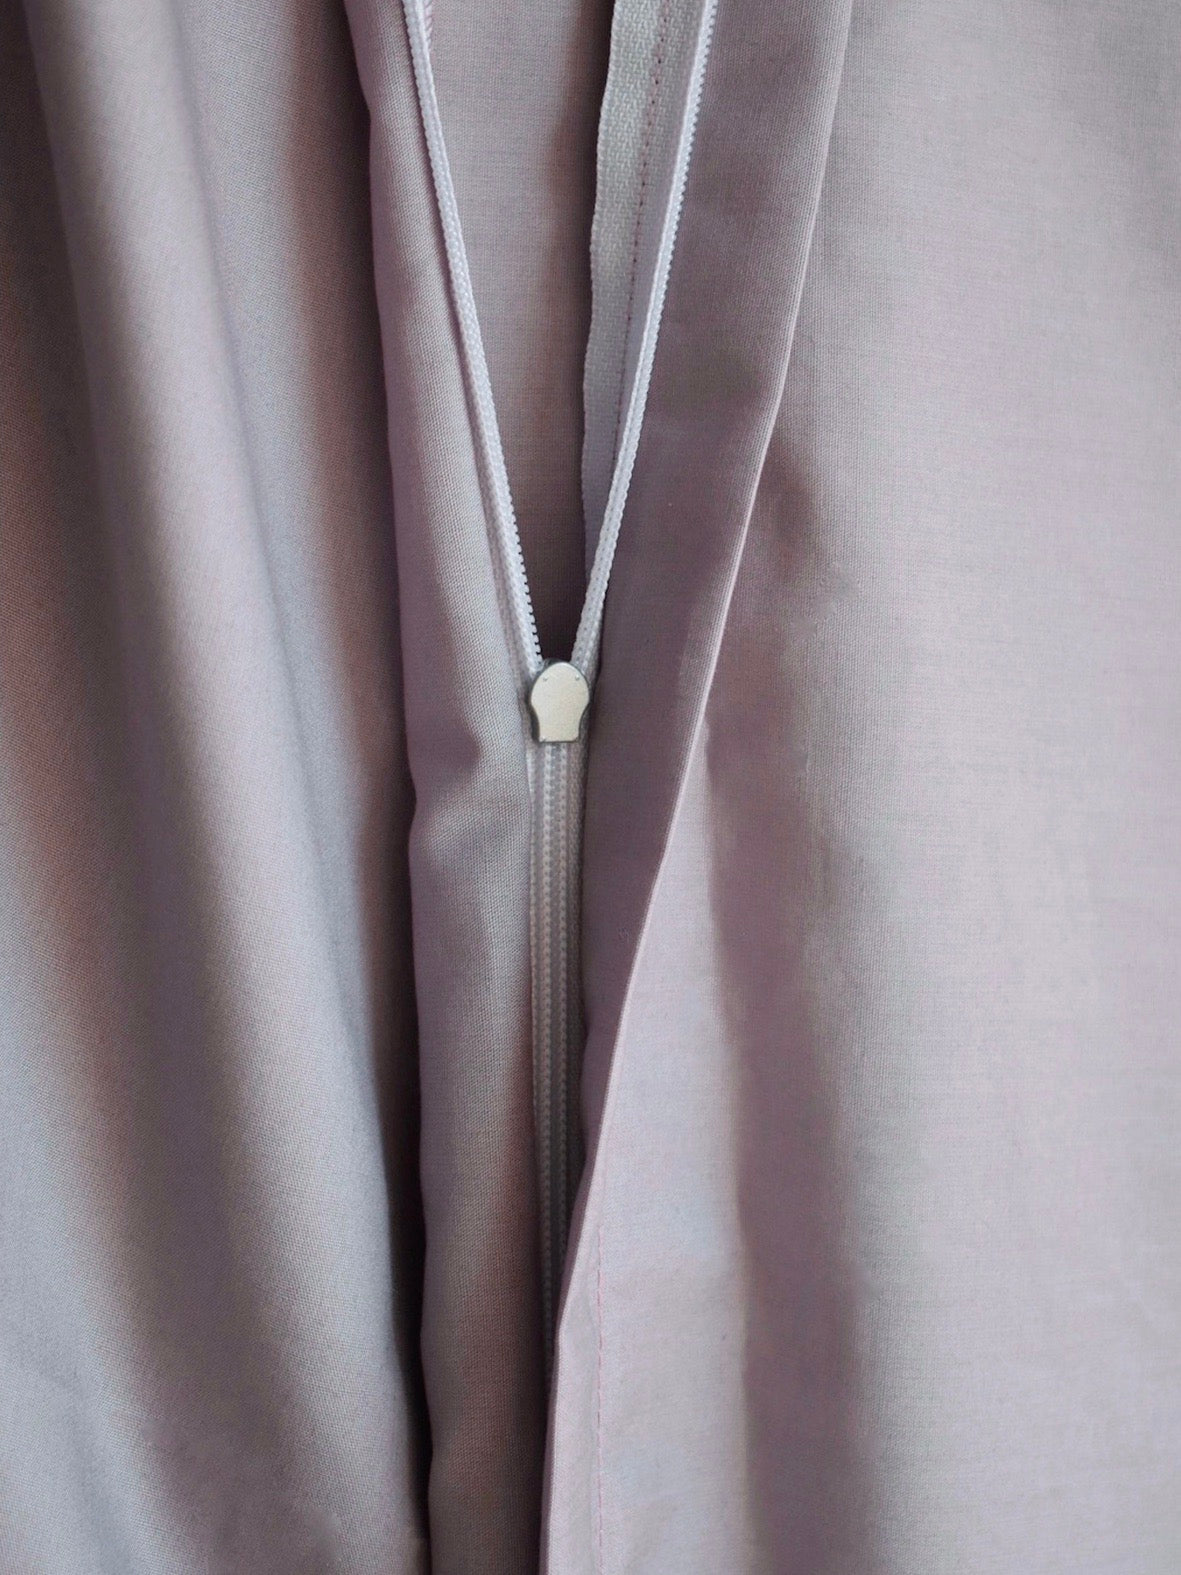 Percale Duvet Cover / Muted Mauve